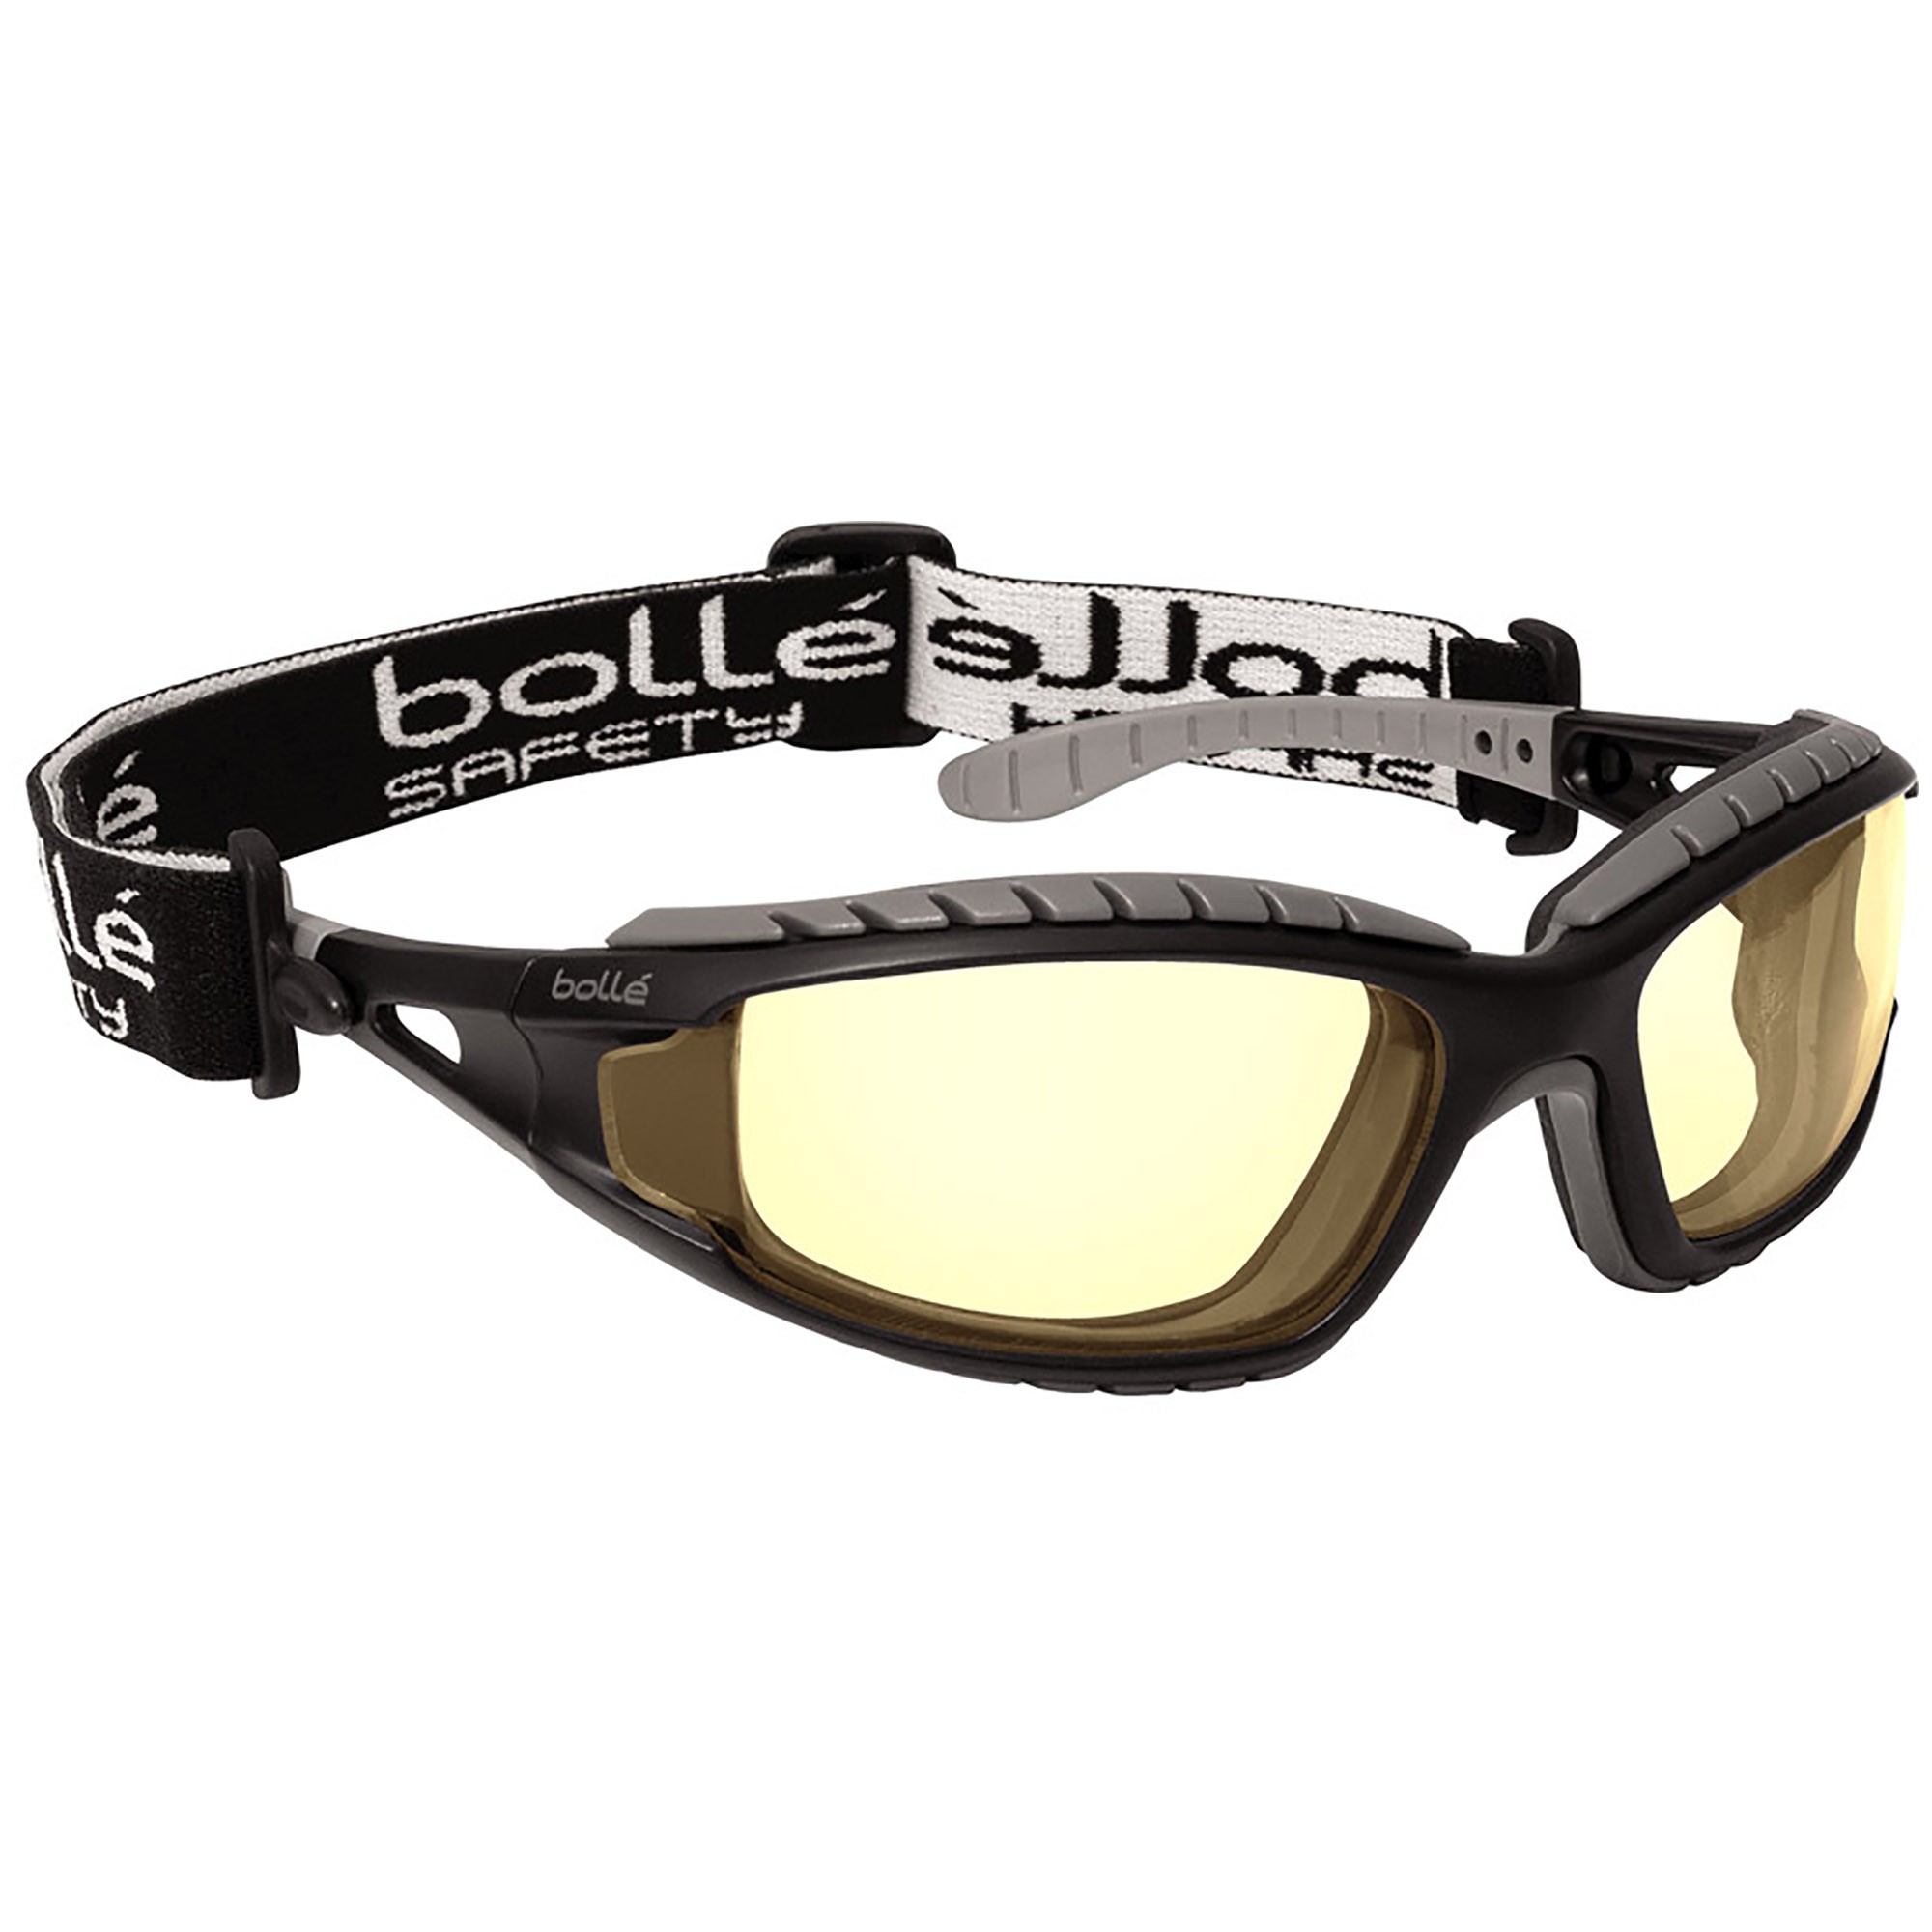 Bolle 40087 Tracker Safety Glasses/Goggles - Black/Grey Temples ...